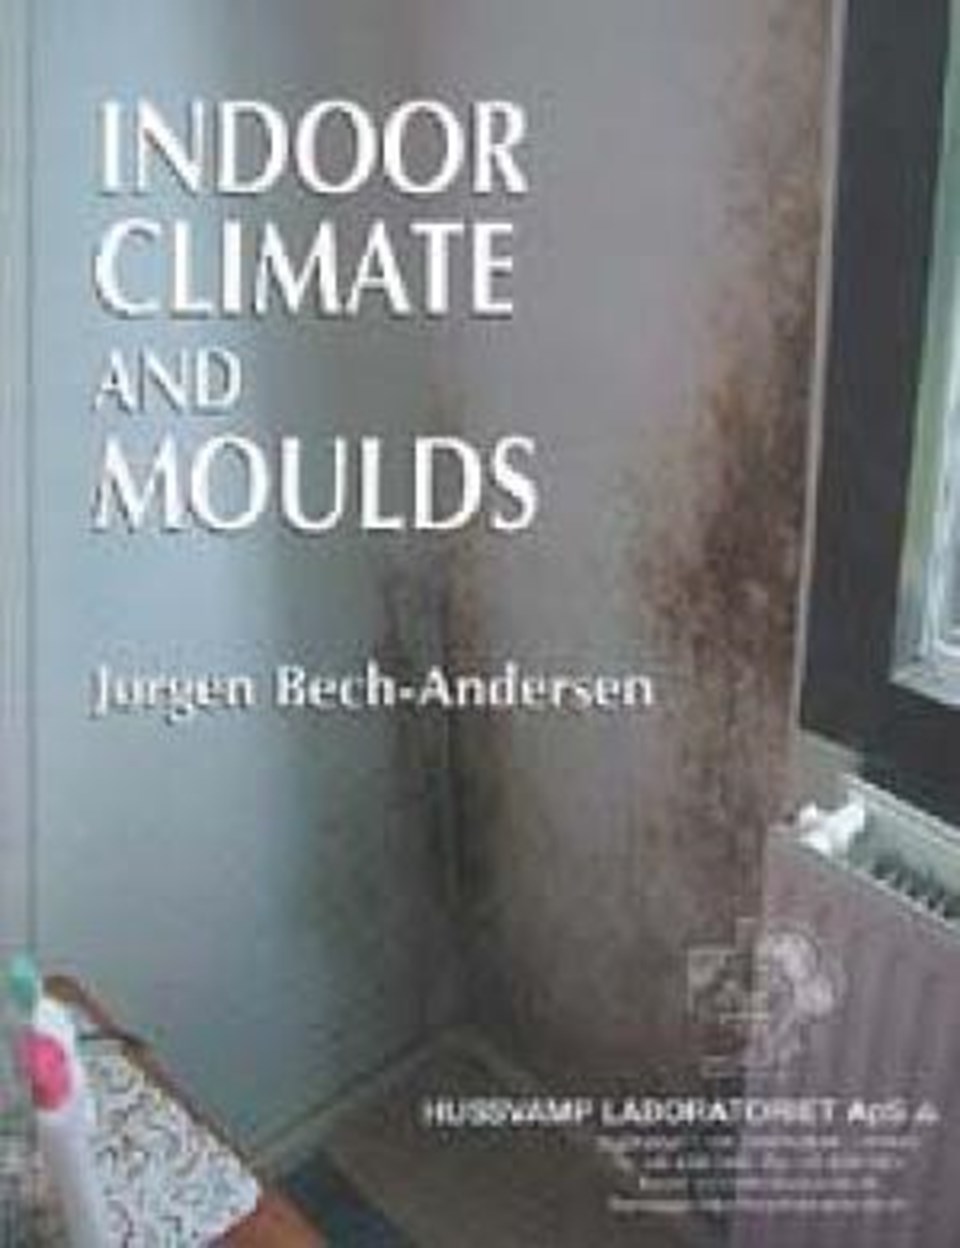 Indoor climate and moulds